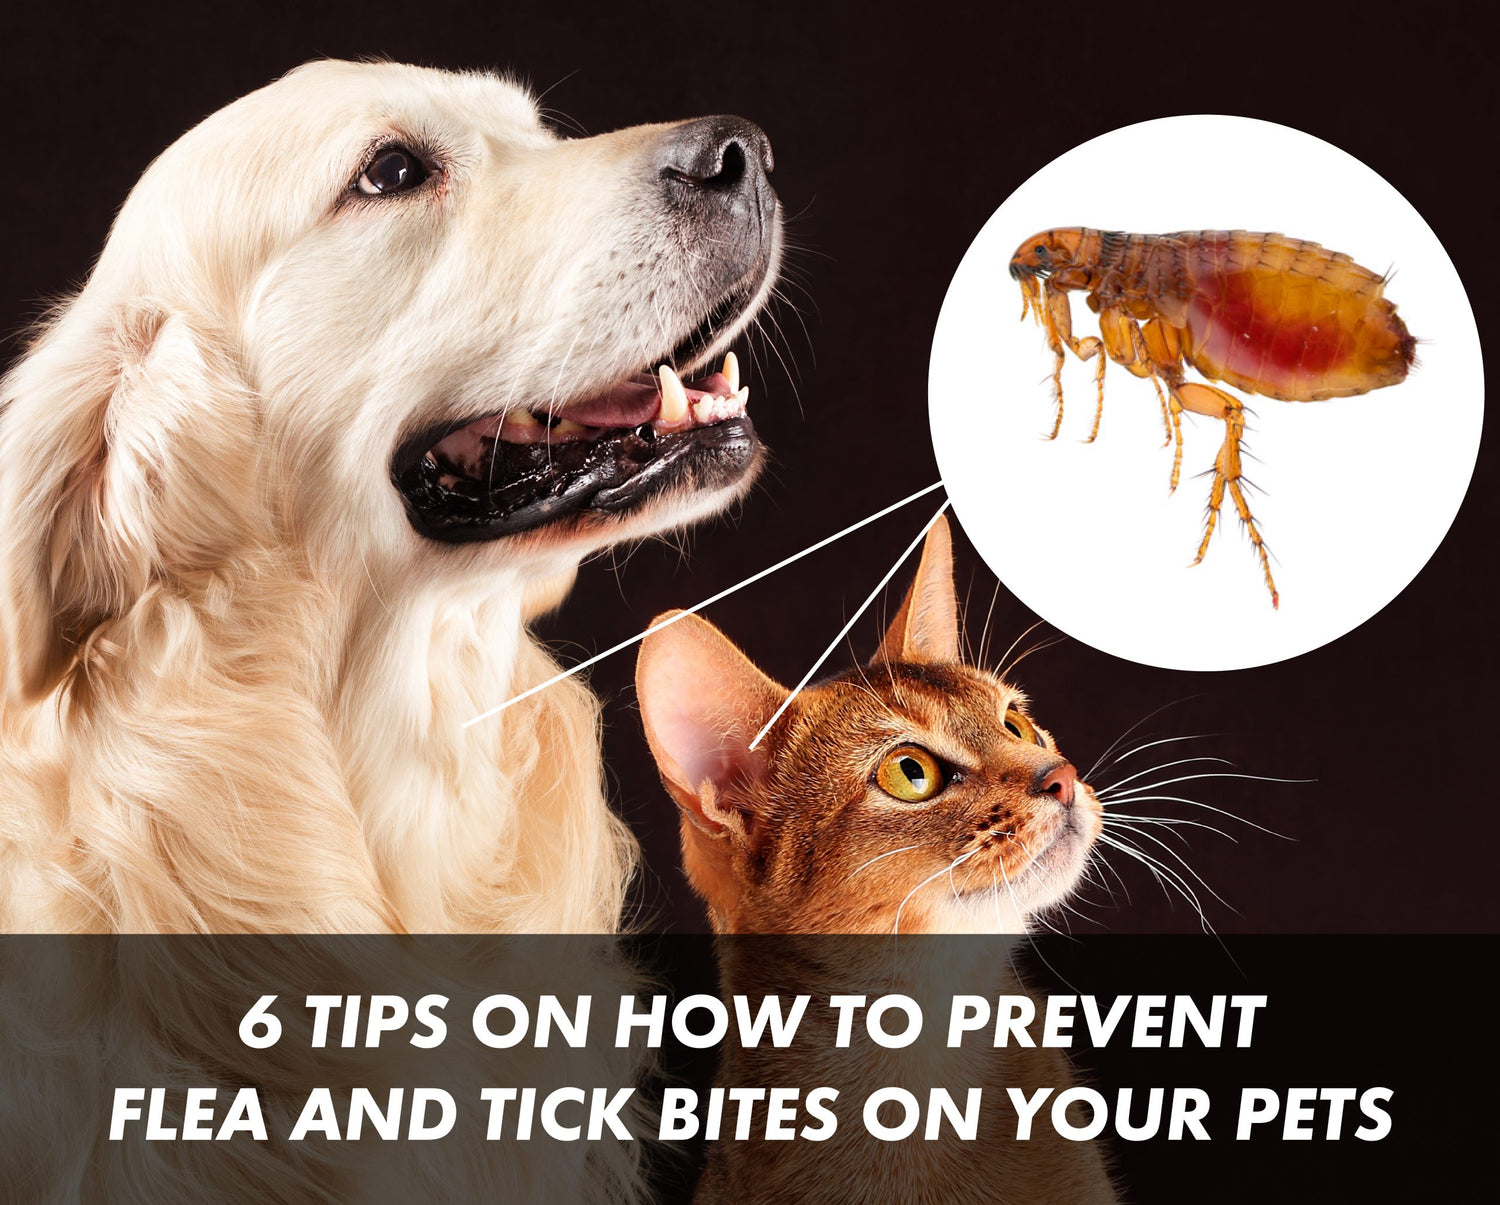 7 Tips on How to Prevent Flea and Tick Bites on your Pets